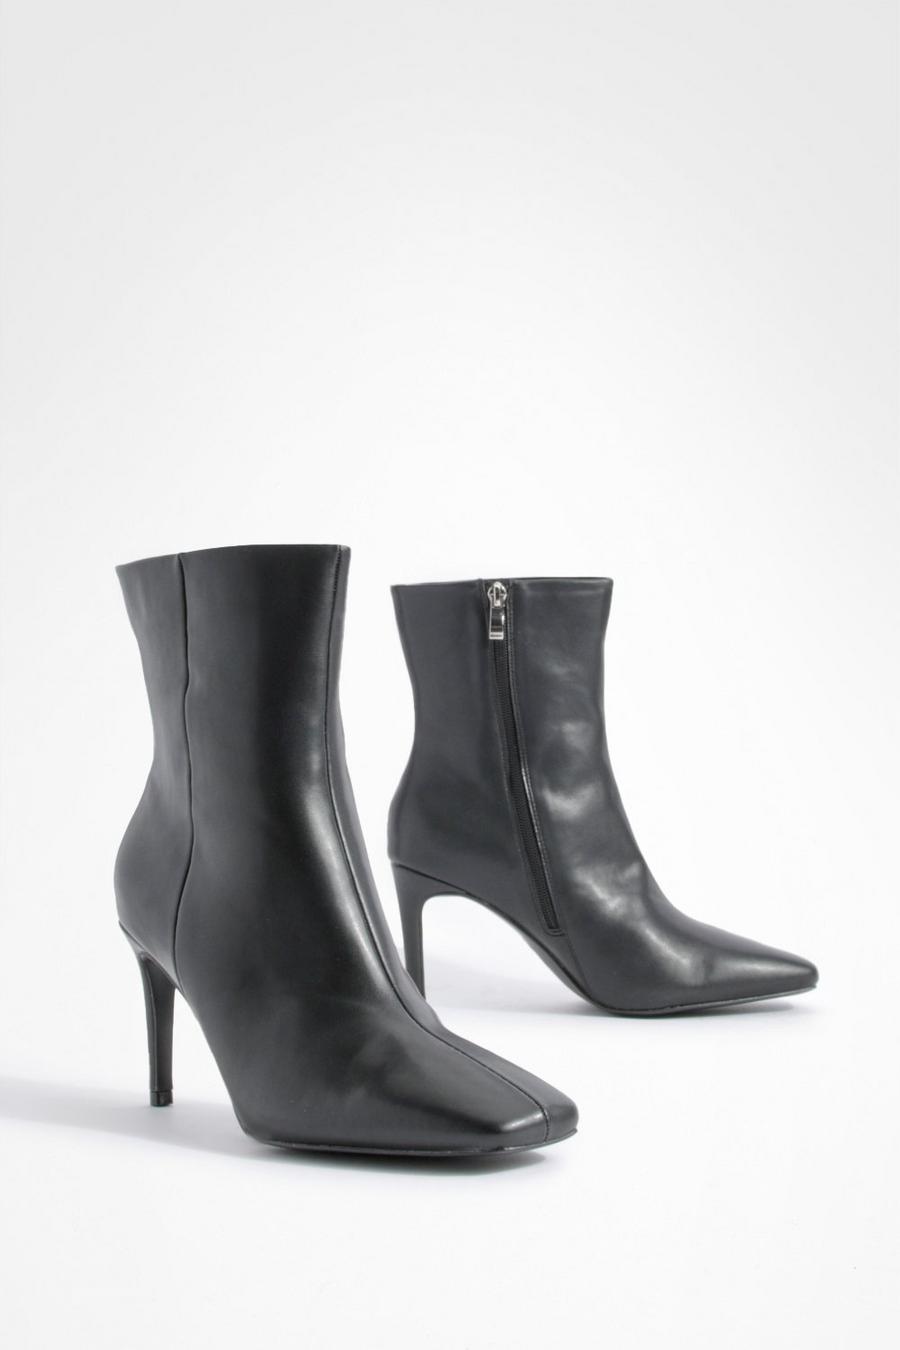 Black Wide Width Square Toe Stiletto Ankle Boots